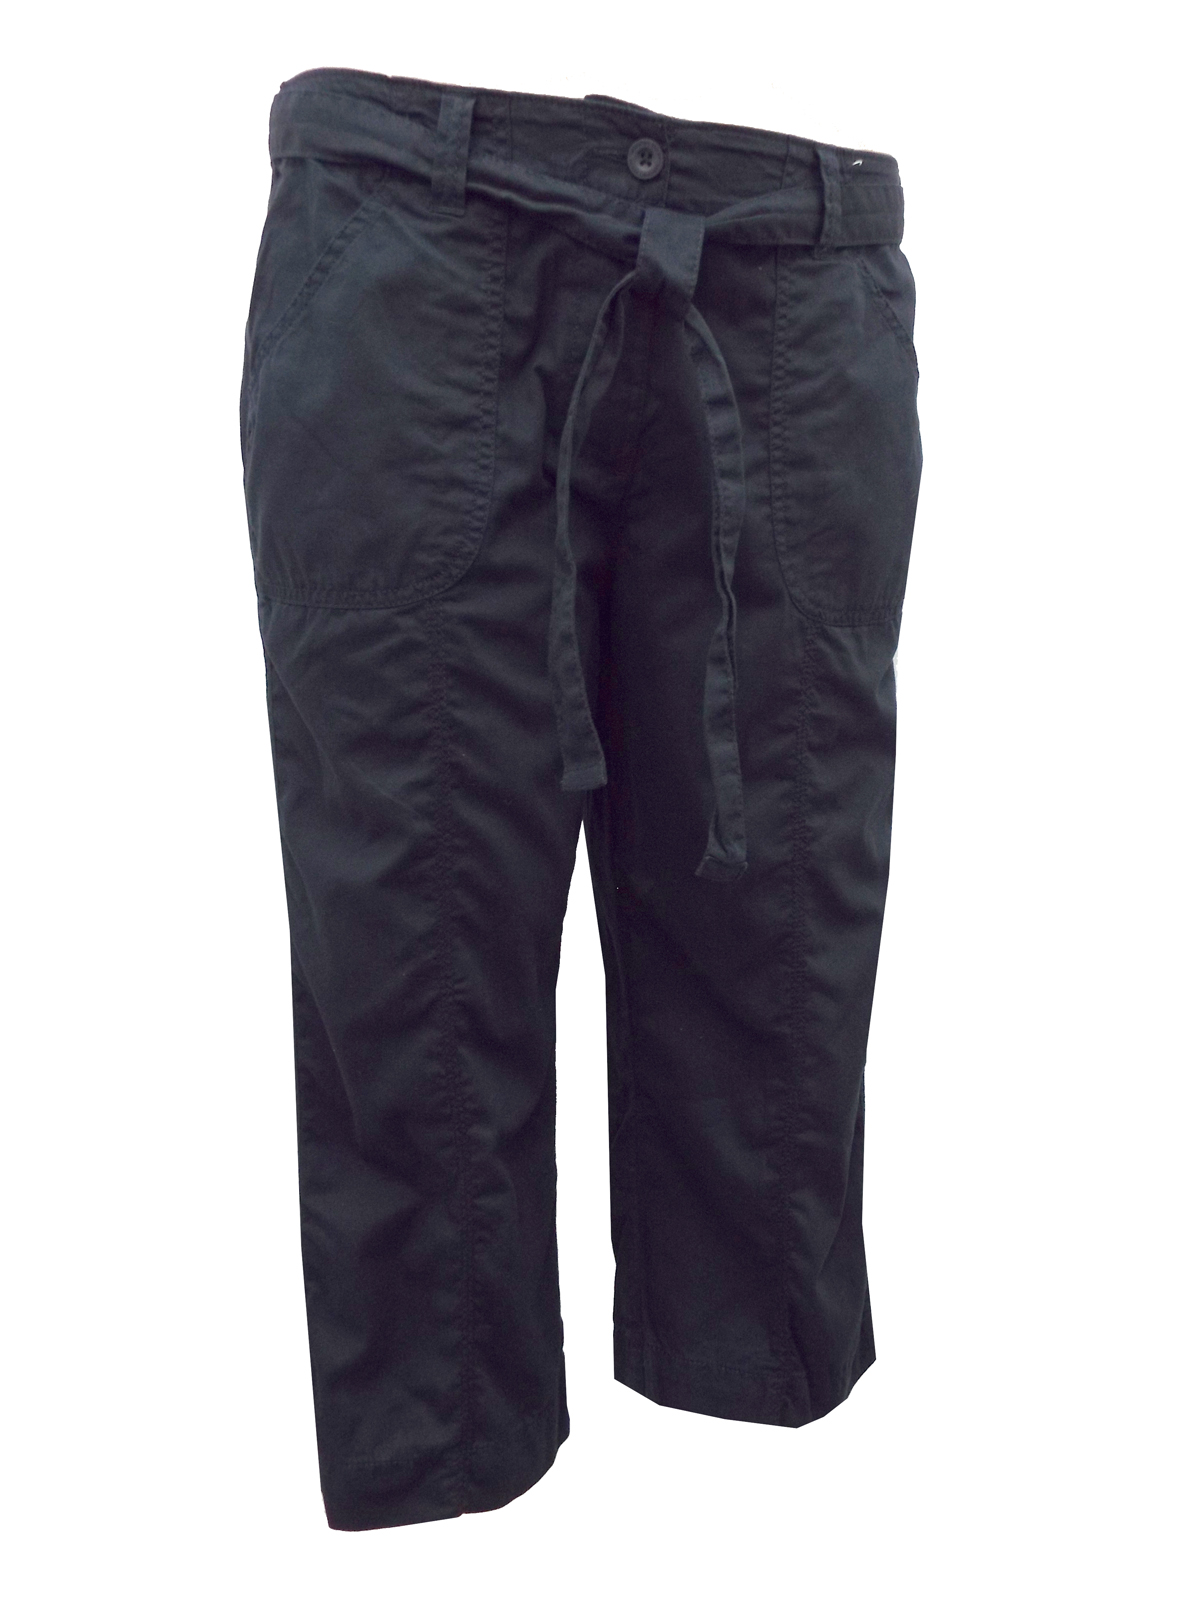 Marks and Spencer - - M&5 BLACK Belted Cropped Cargo Trousers - Size 16 ...